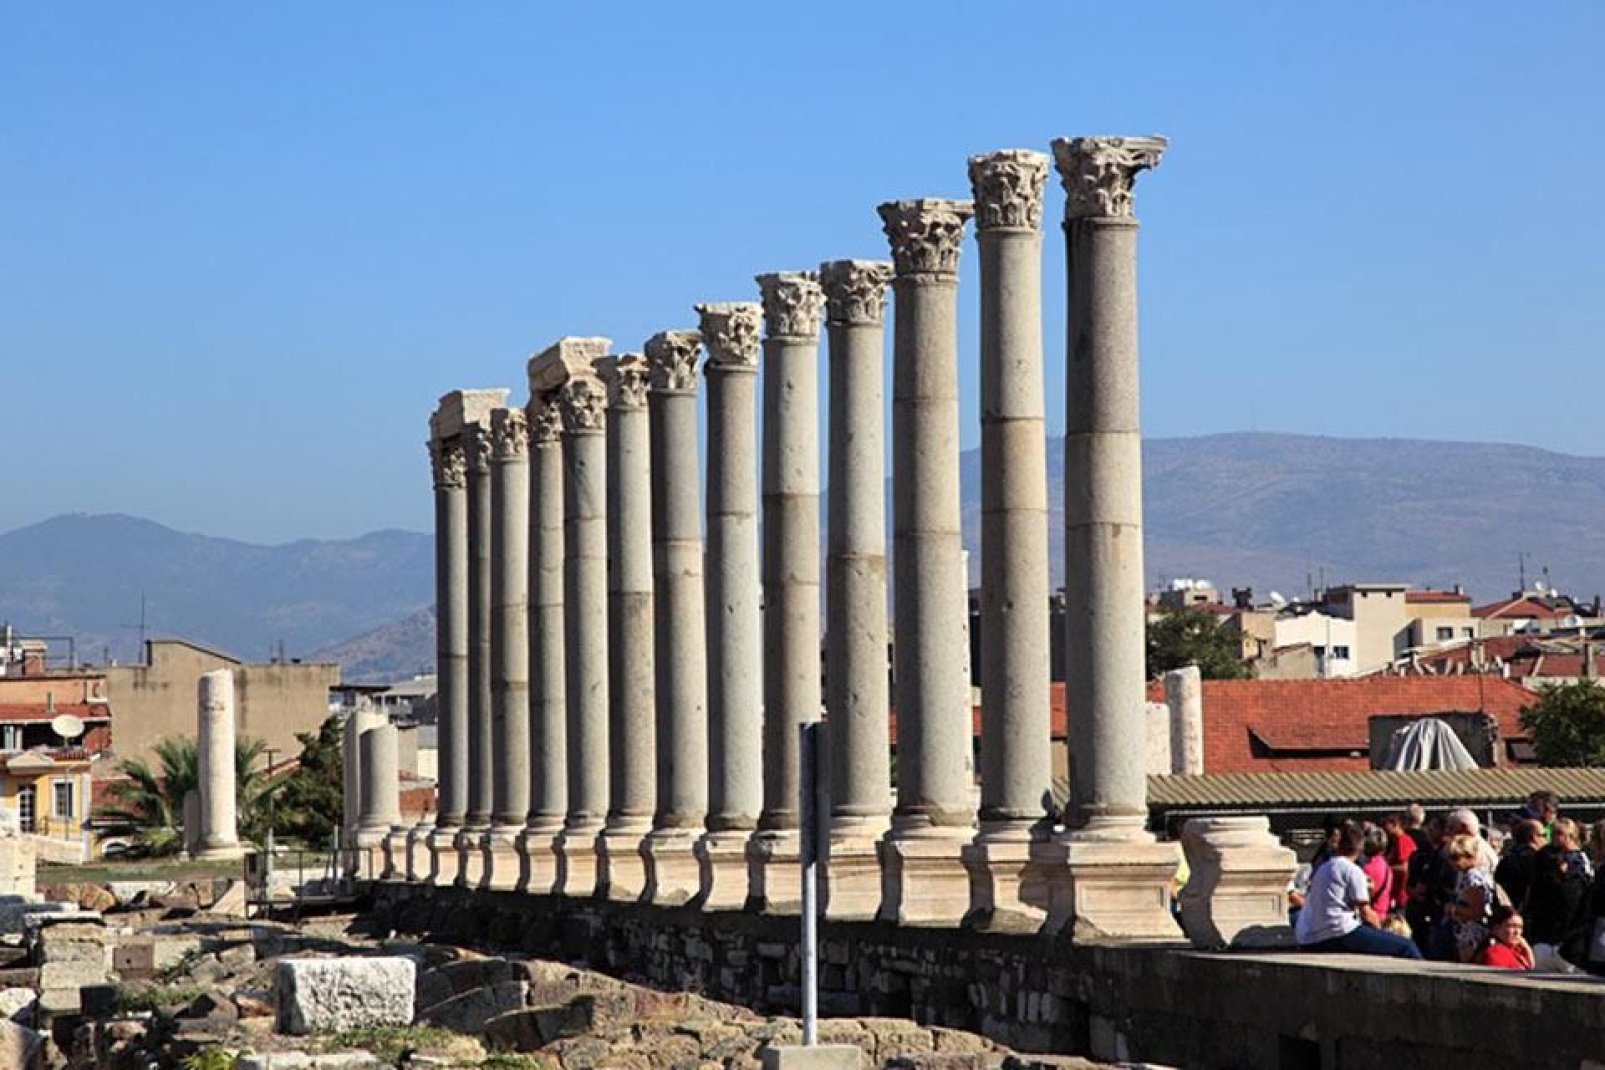 The Agora in Izmir is the largest of the Ionian agoras.